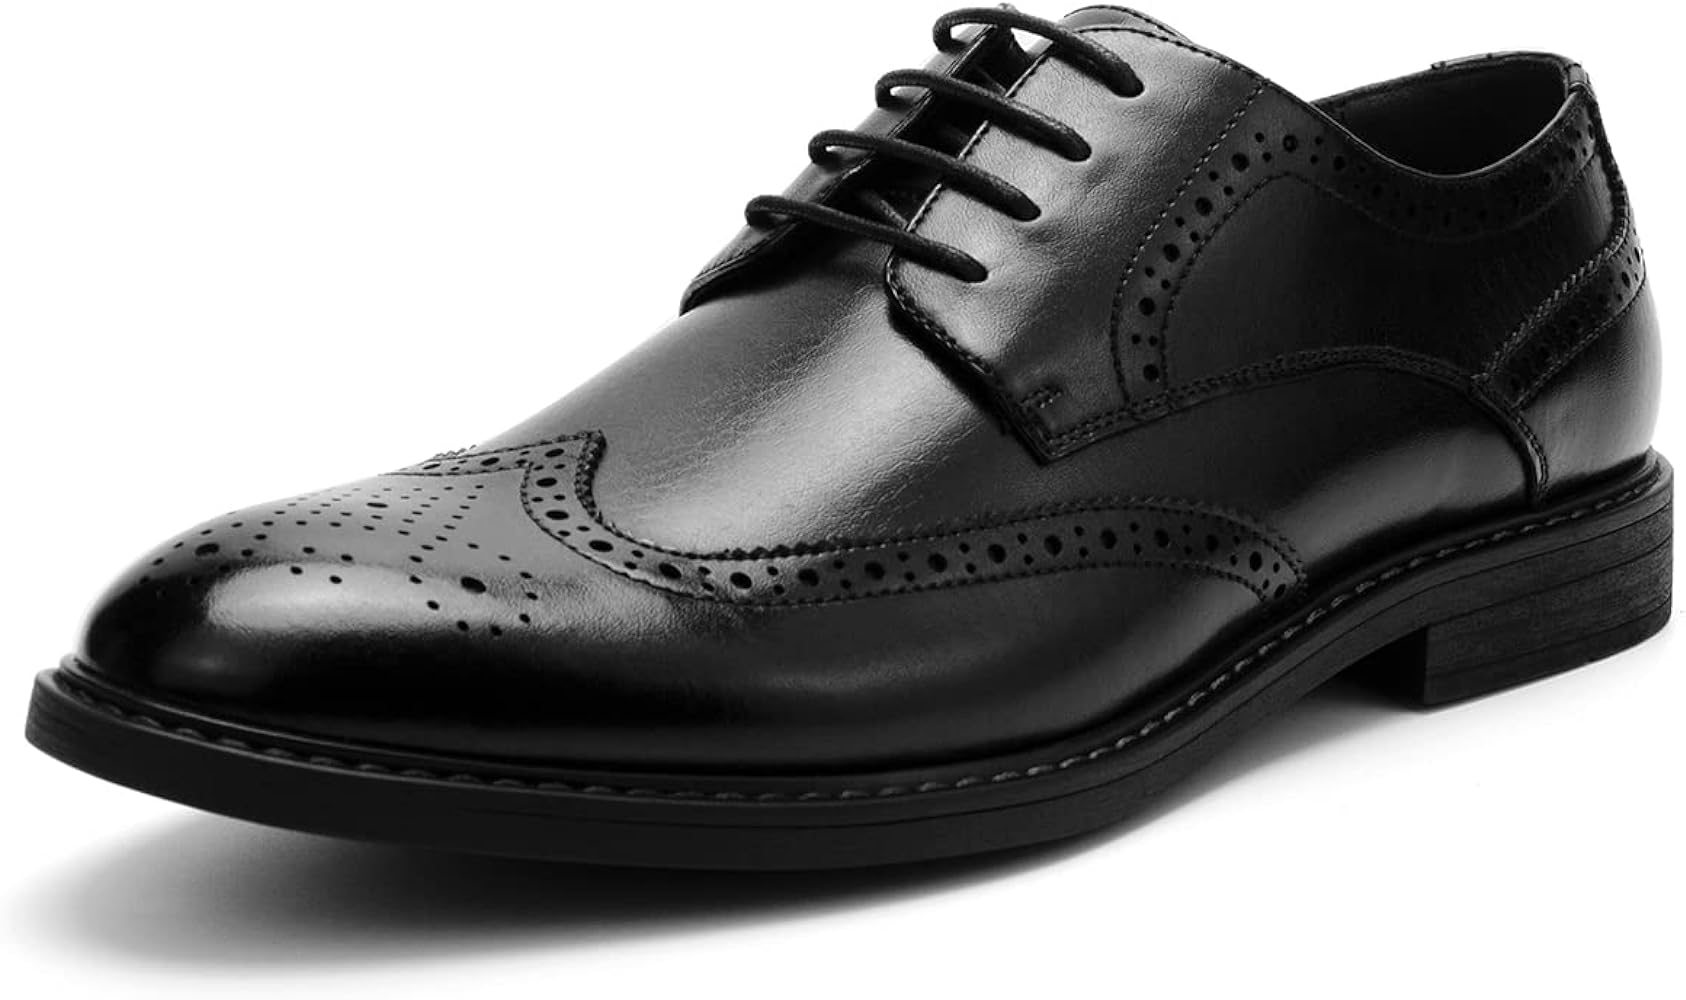 Buy Temeshu Men's Dress Shoes Casual Oxford Shoes Business Formal Shoes,  Black, 8.5 at Amazon.in